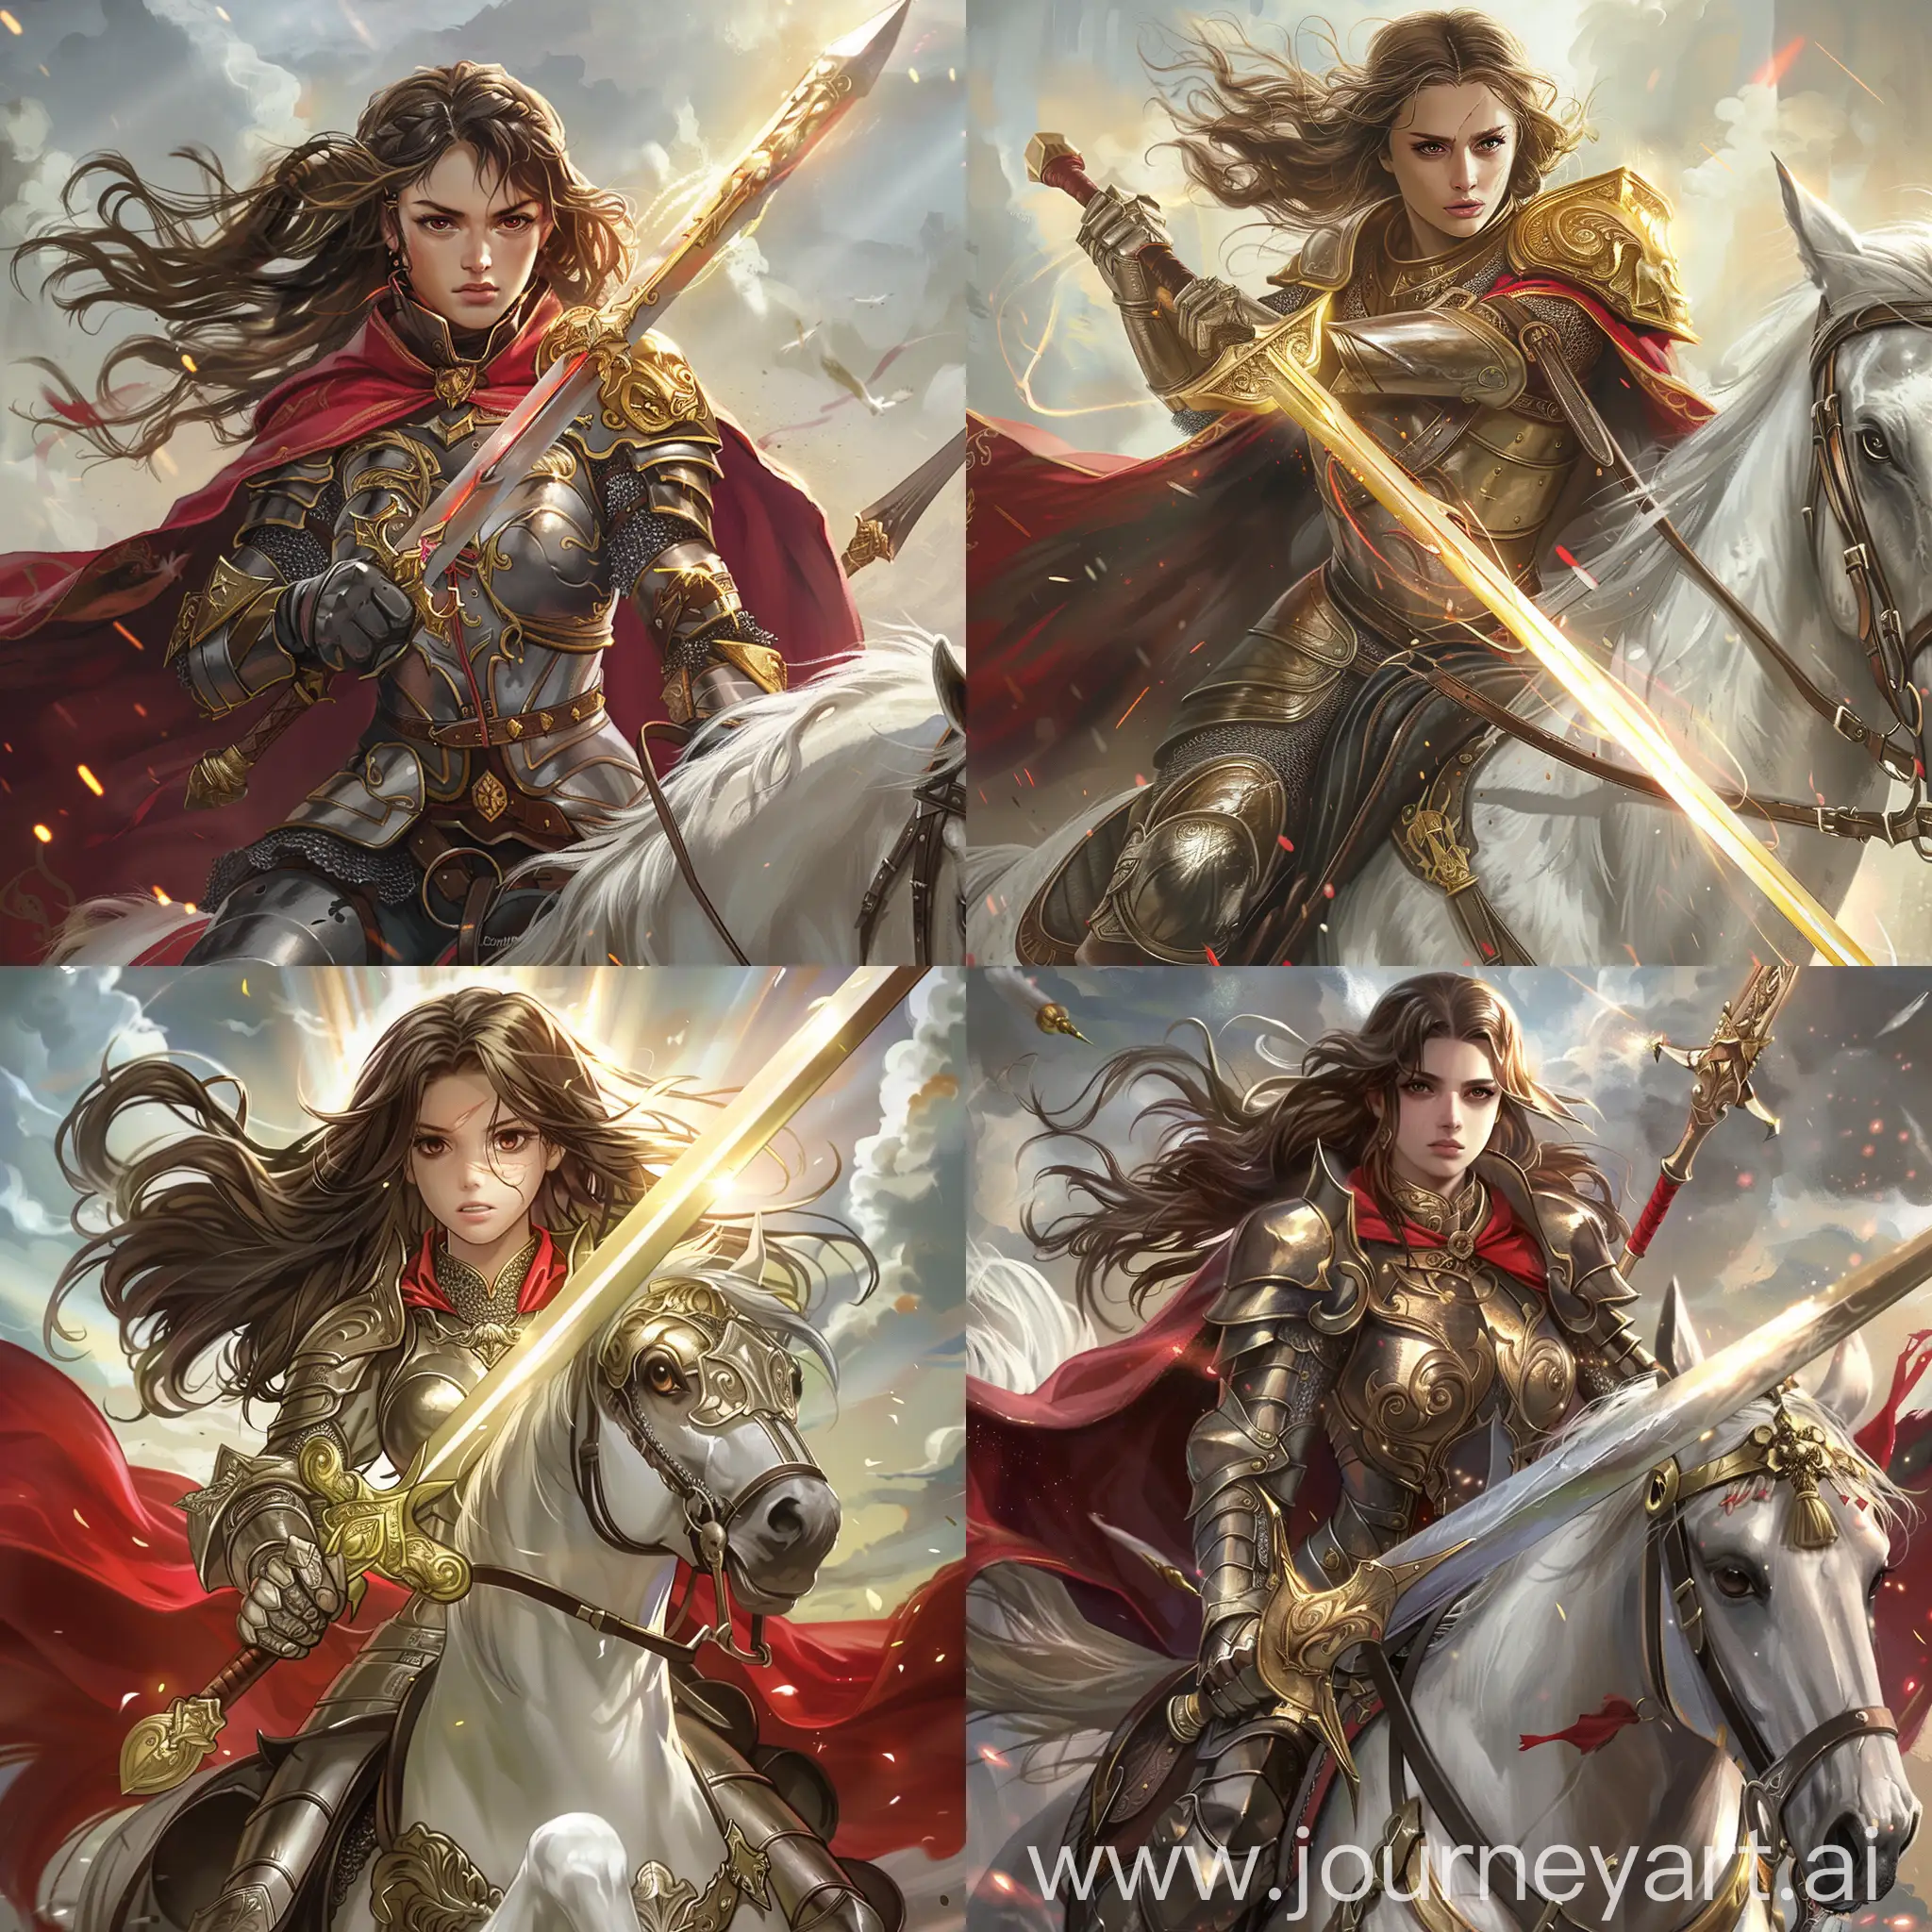 Fierce-European-Girl-in-Red-Cloak-Riding-White-Horse-with-Golden-Sword